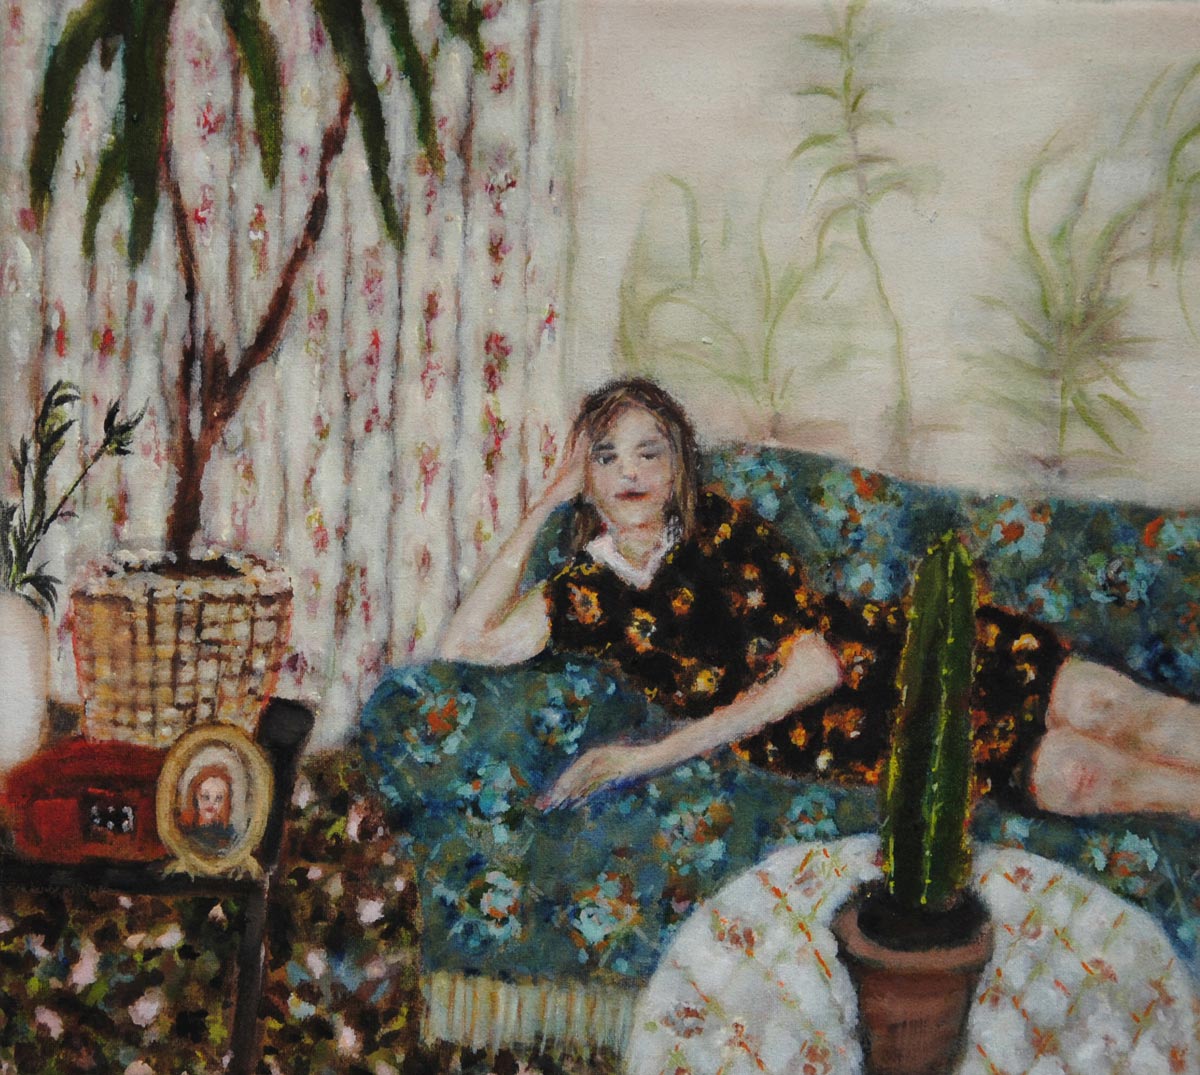 Home sweet home – 25 x 28 cm,oil on canvas, 2012